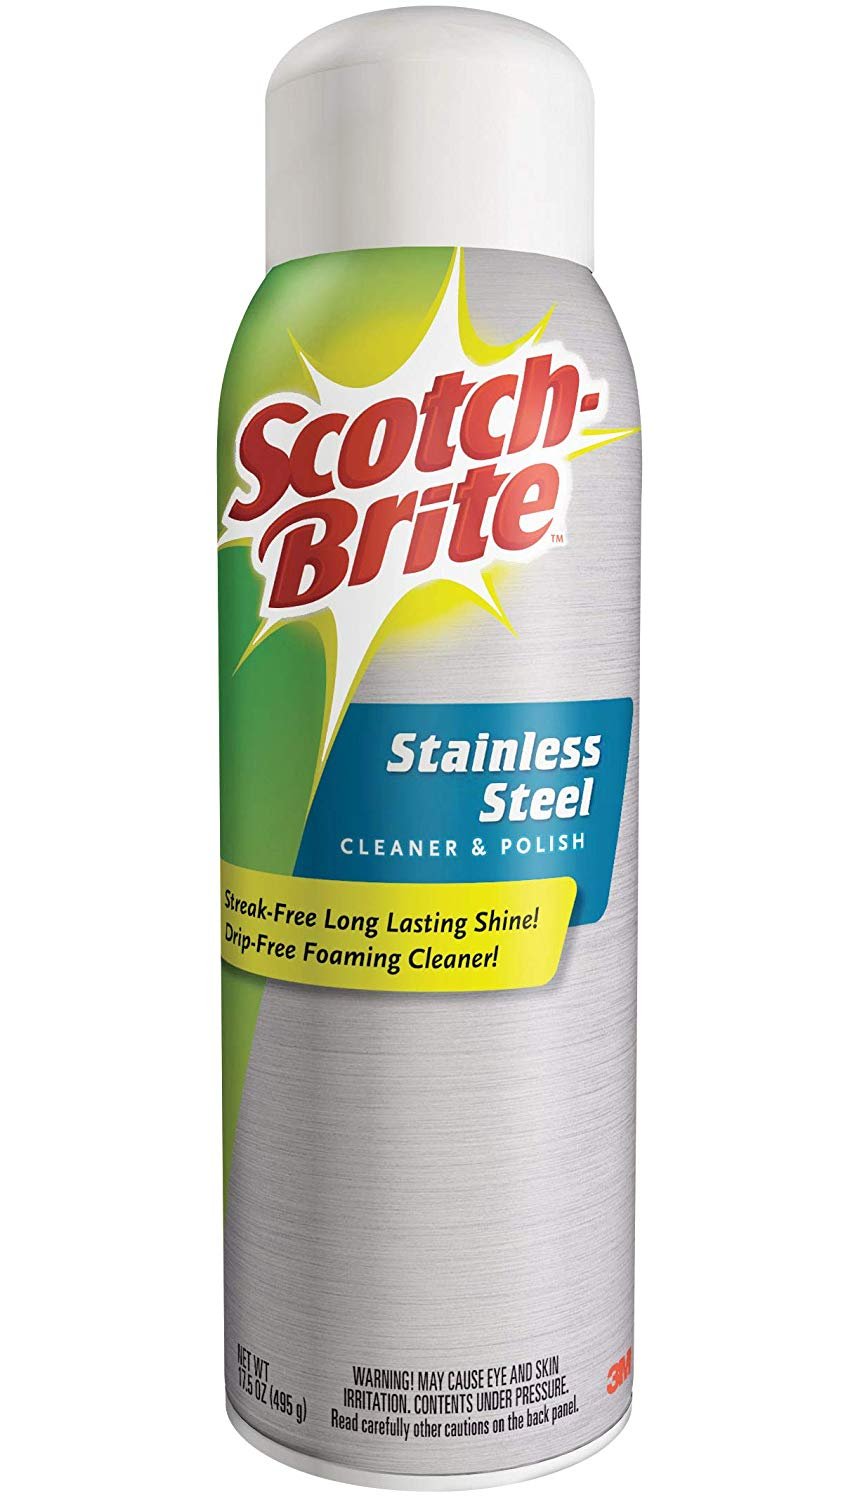 Scotch-Brite Stainless Steel Cleaner and Polish 17.5 Ounces